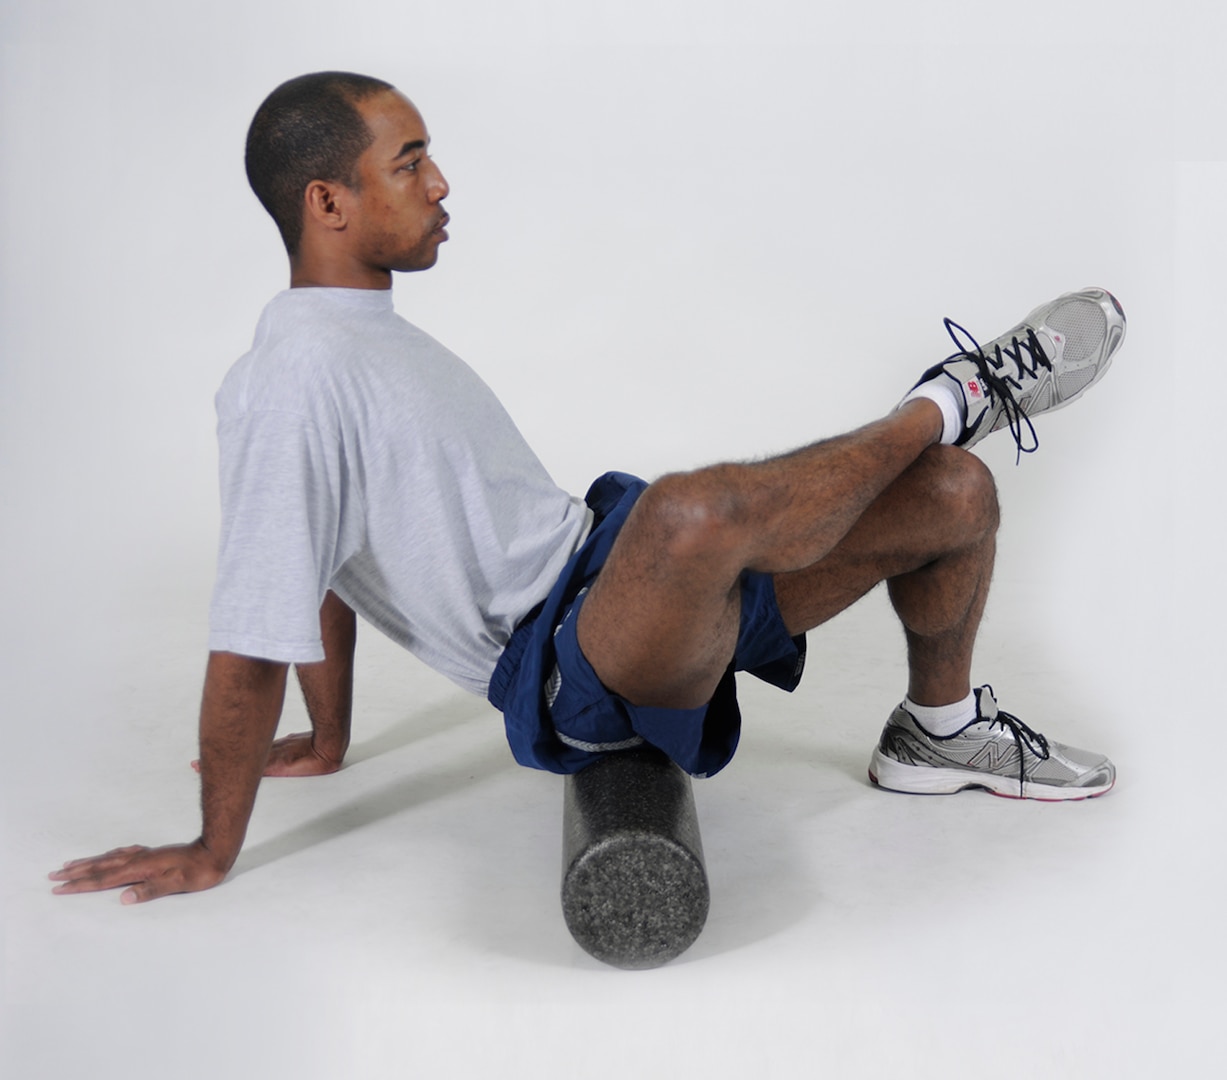 Glutes Foam Roll
Sit on a foam roller with it positioned on the right glute. Cross the right leg over the front of the left thigh and put hands on the floor for support. Roll the body forward and backward in small movements from the lower glute to the upper glute. Repeat with the roller under the left glute.
